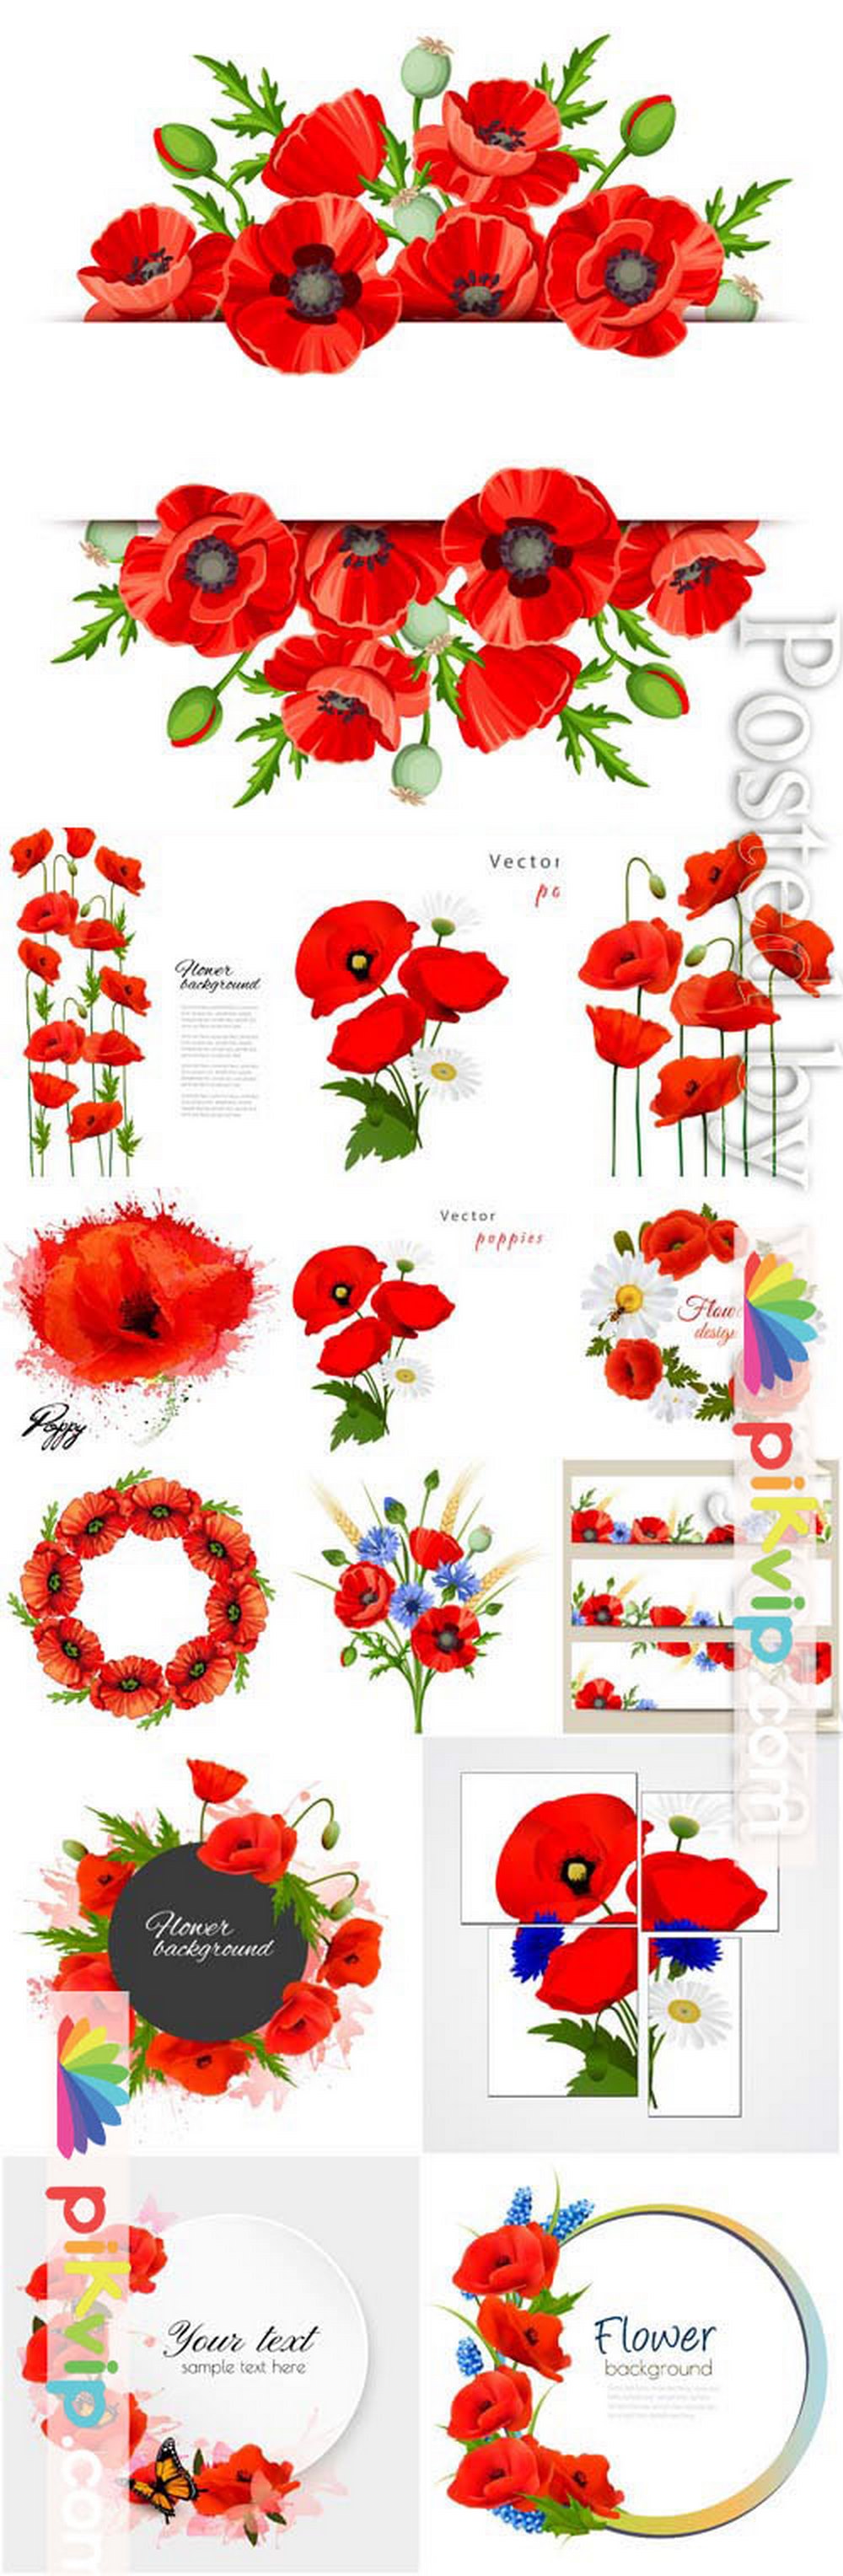 Frames with red poppies in vector